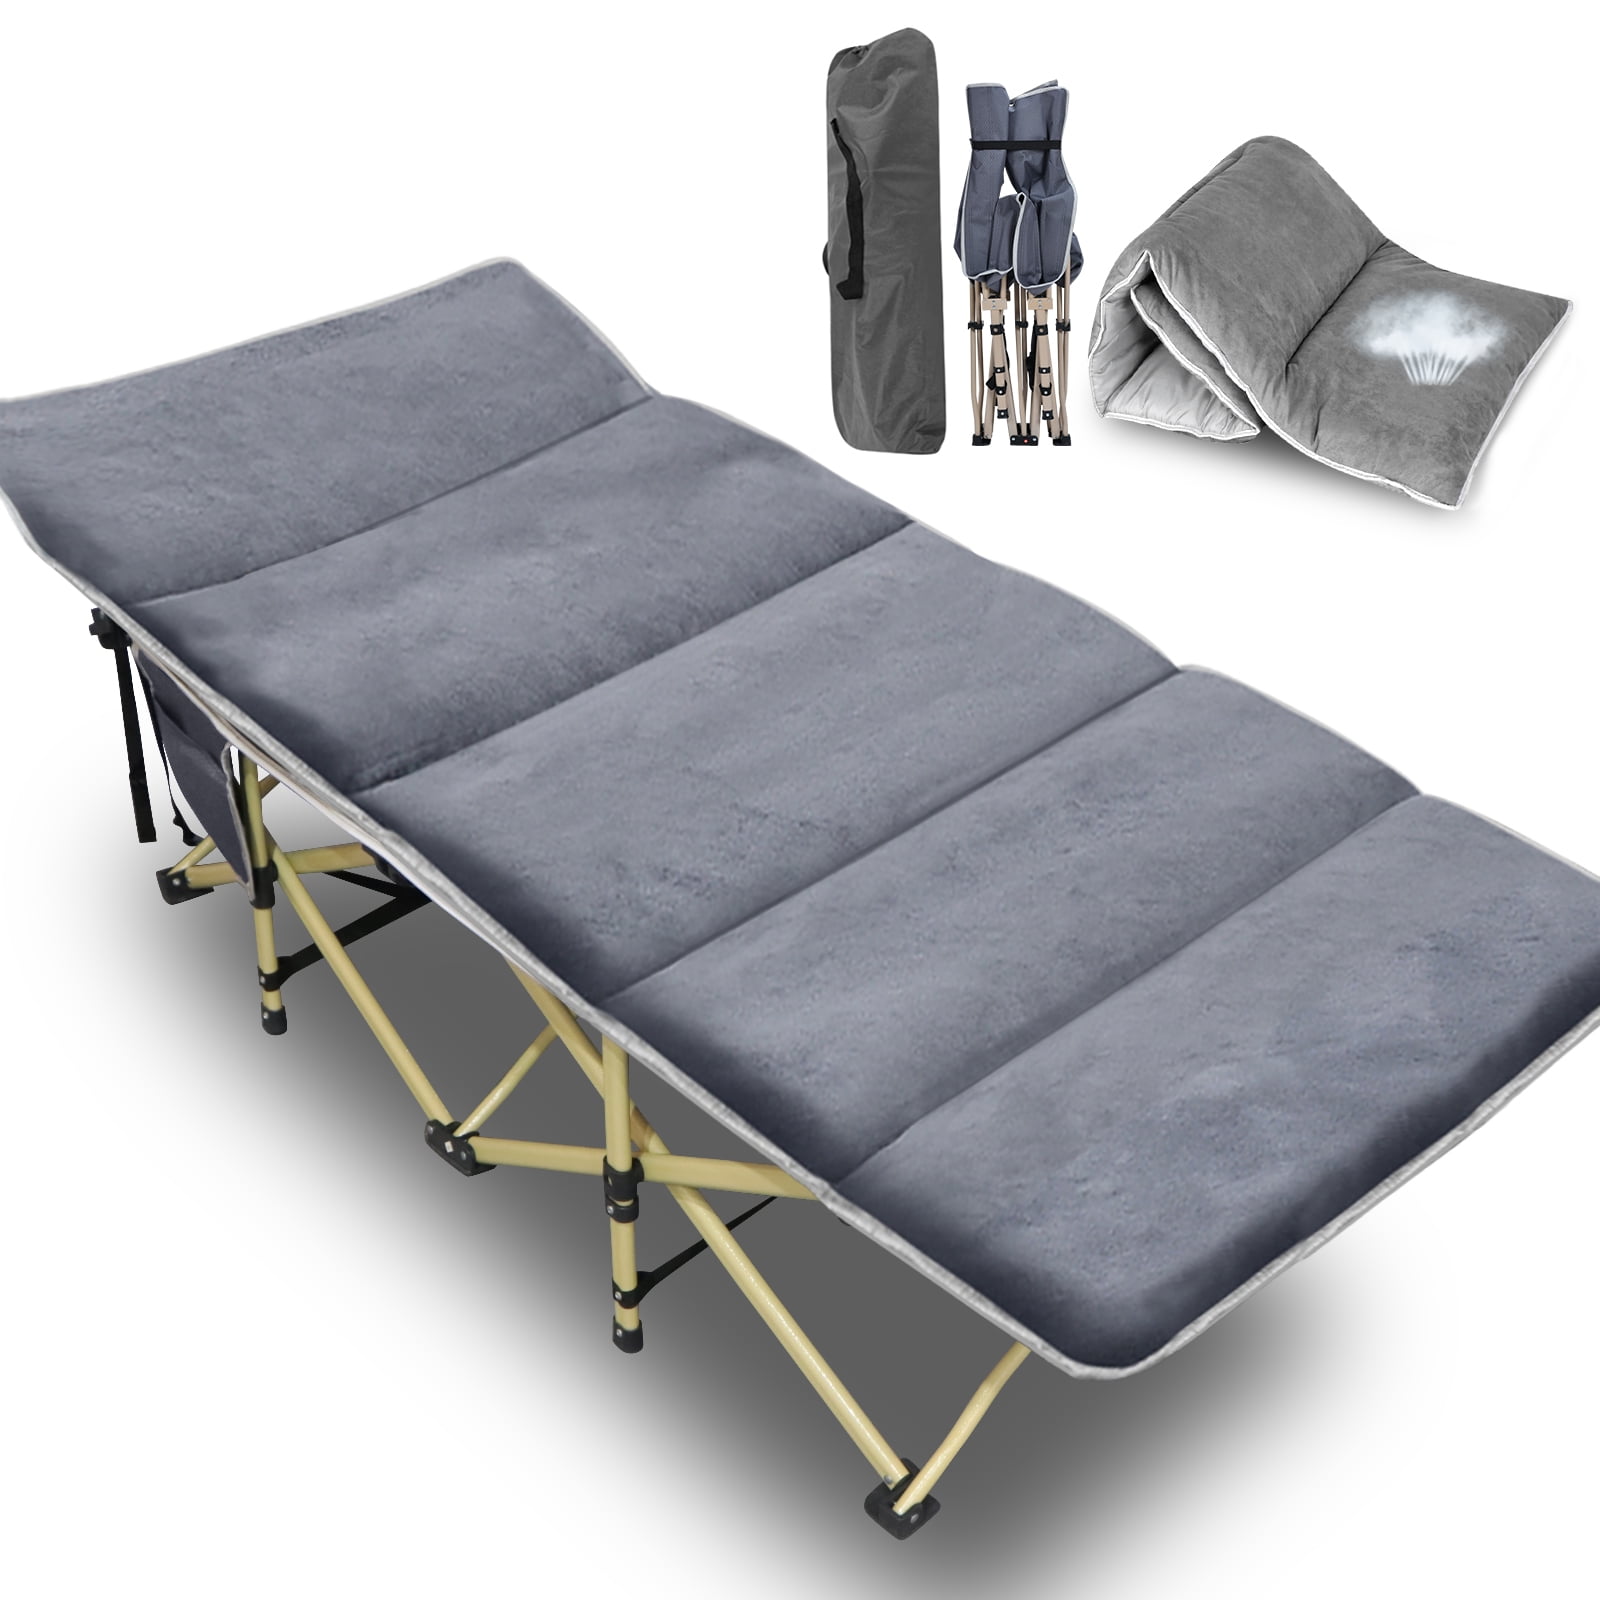 Camping Cots for Adults, Folding Bed Portable Chair SogesGame Camping Cot